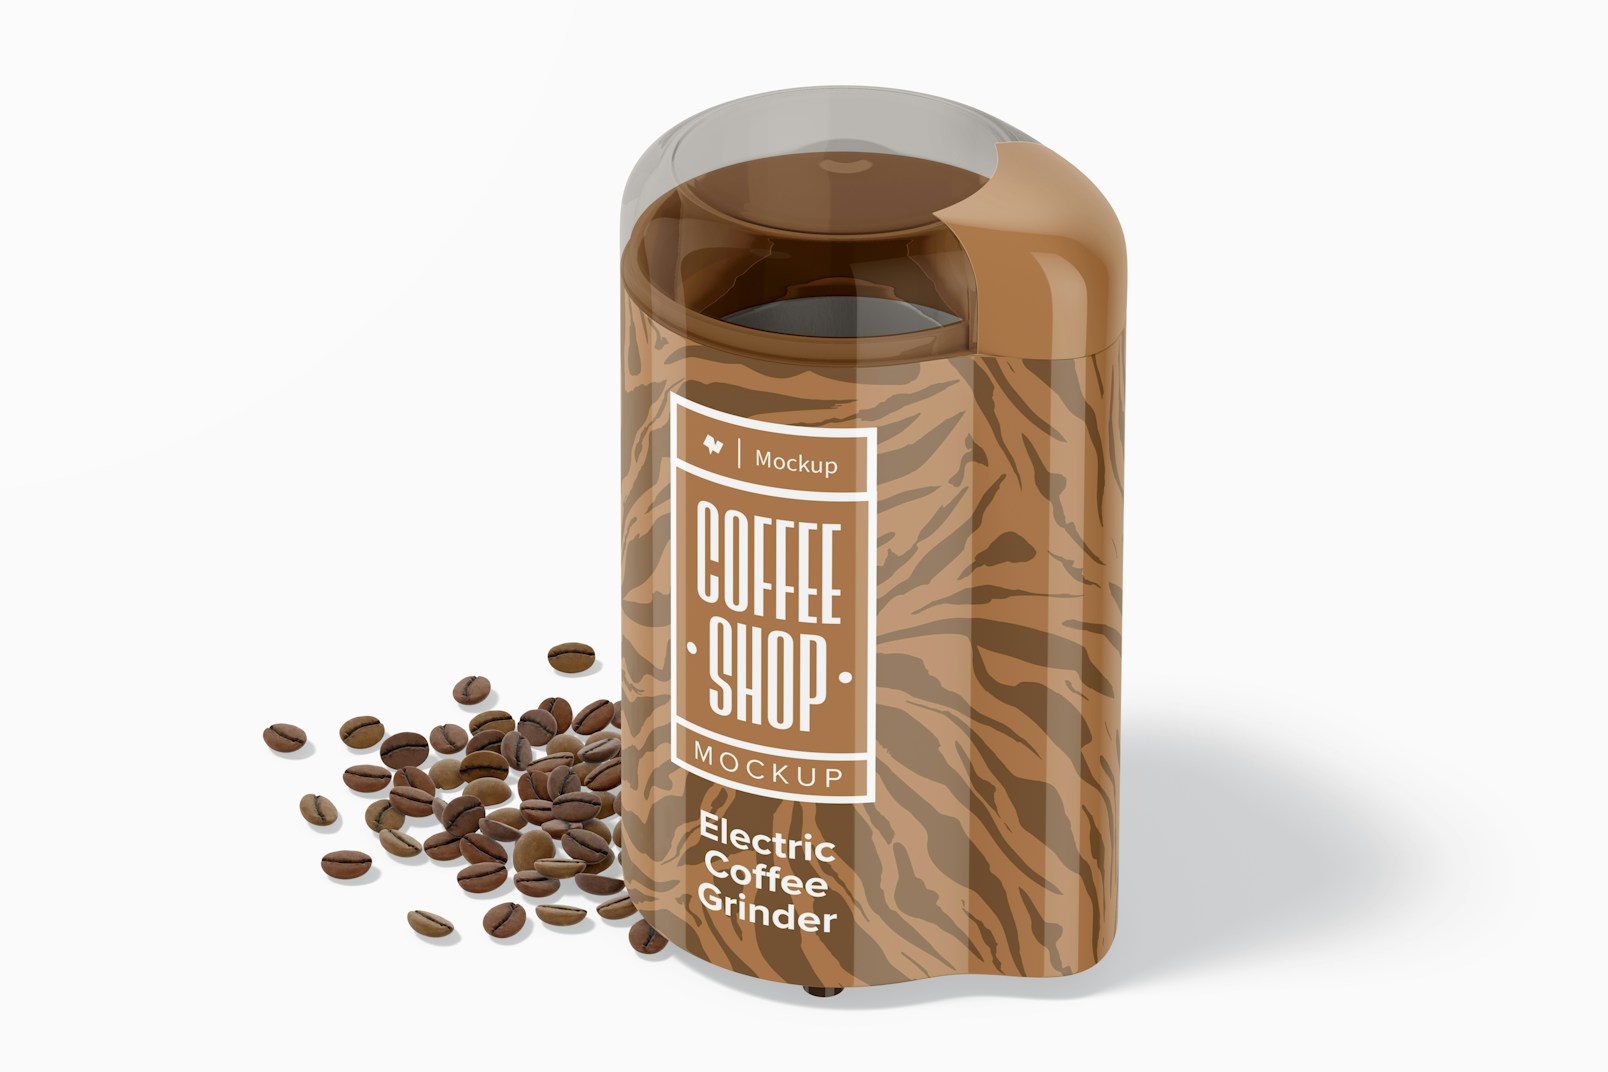 Electric Coffee Grinder Mockup, with Coffee Grains